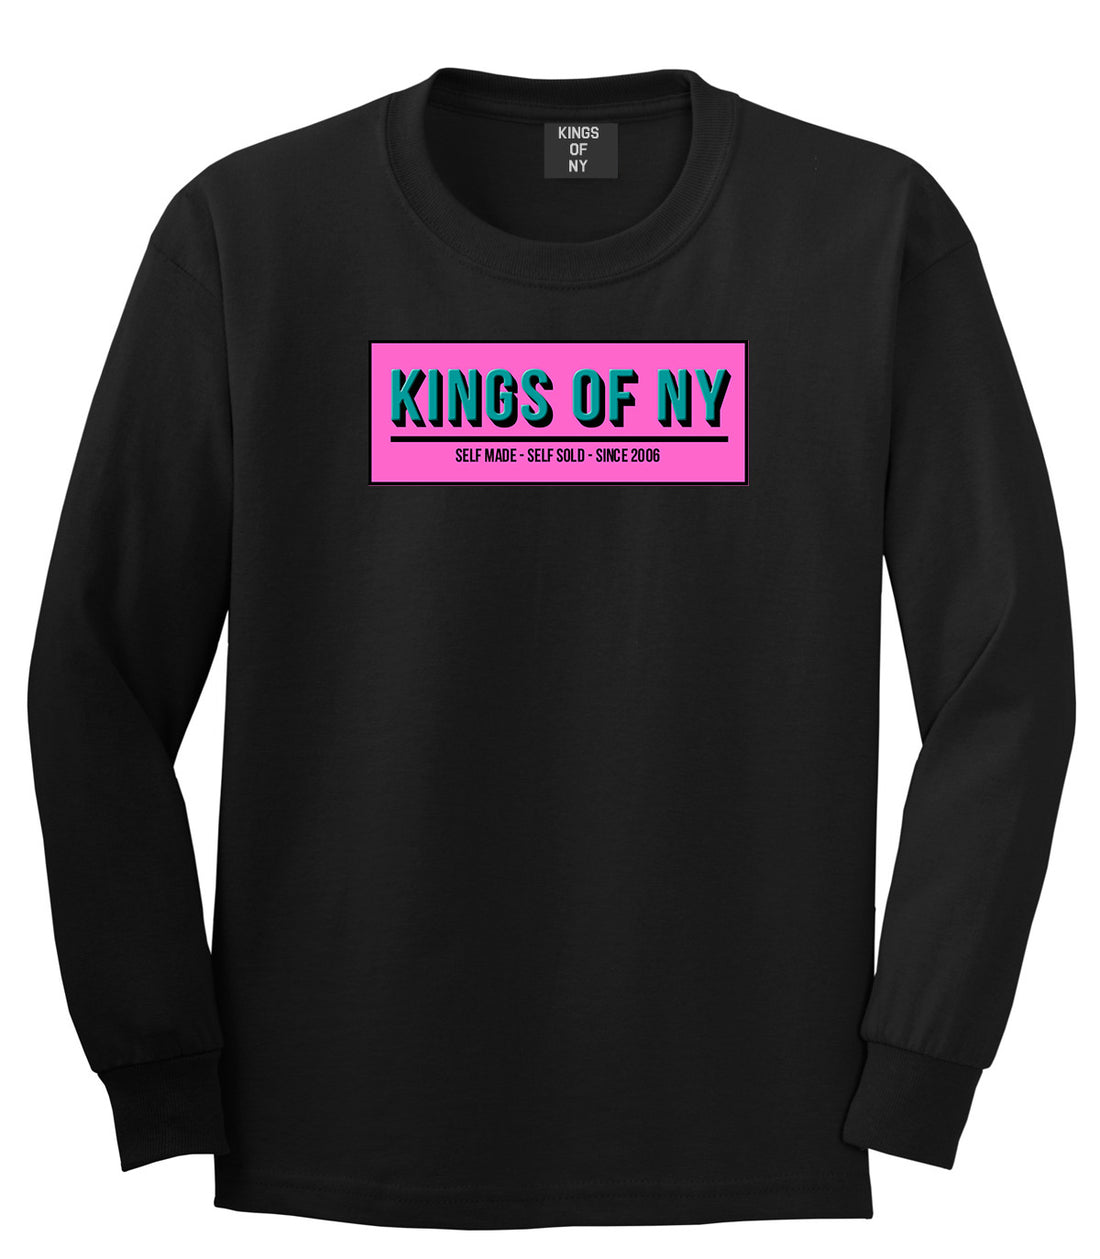 Self Made Self Sold Pink Long Sleeve T-Shirt in Black